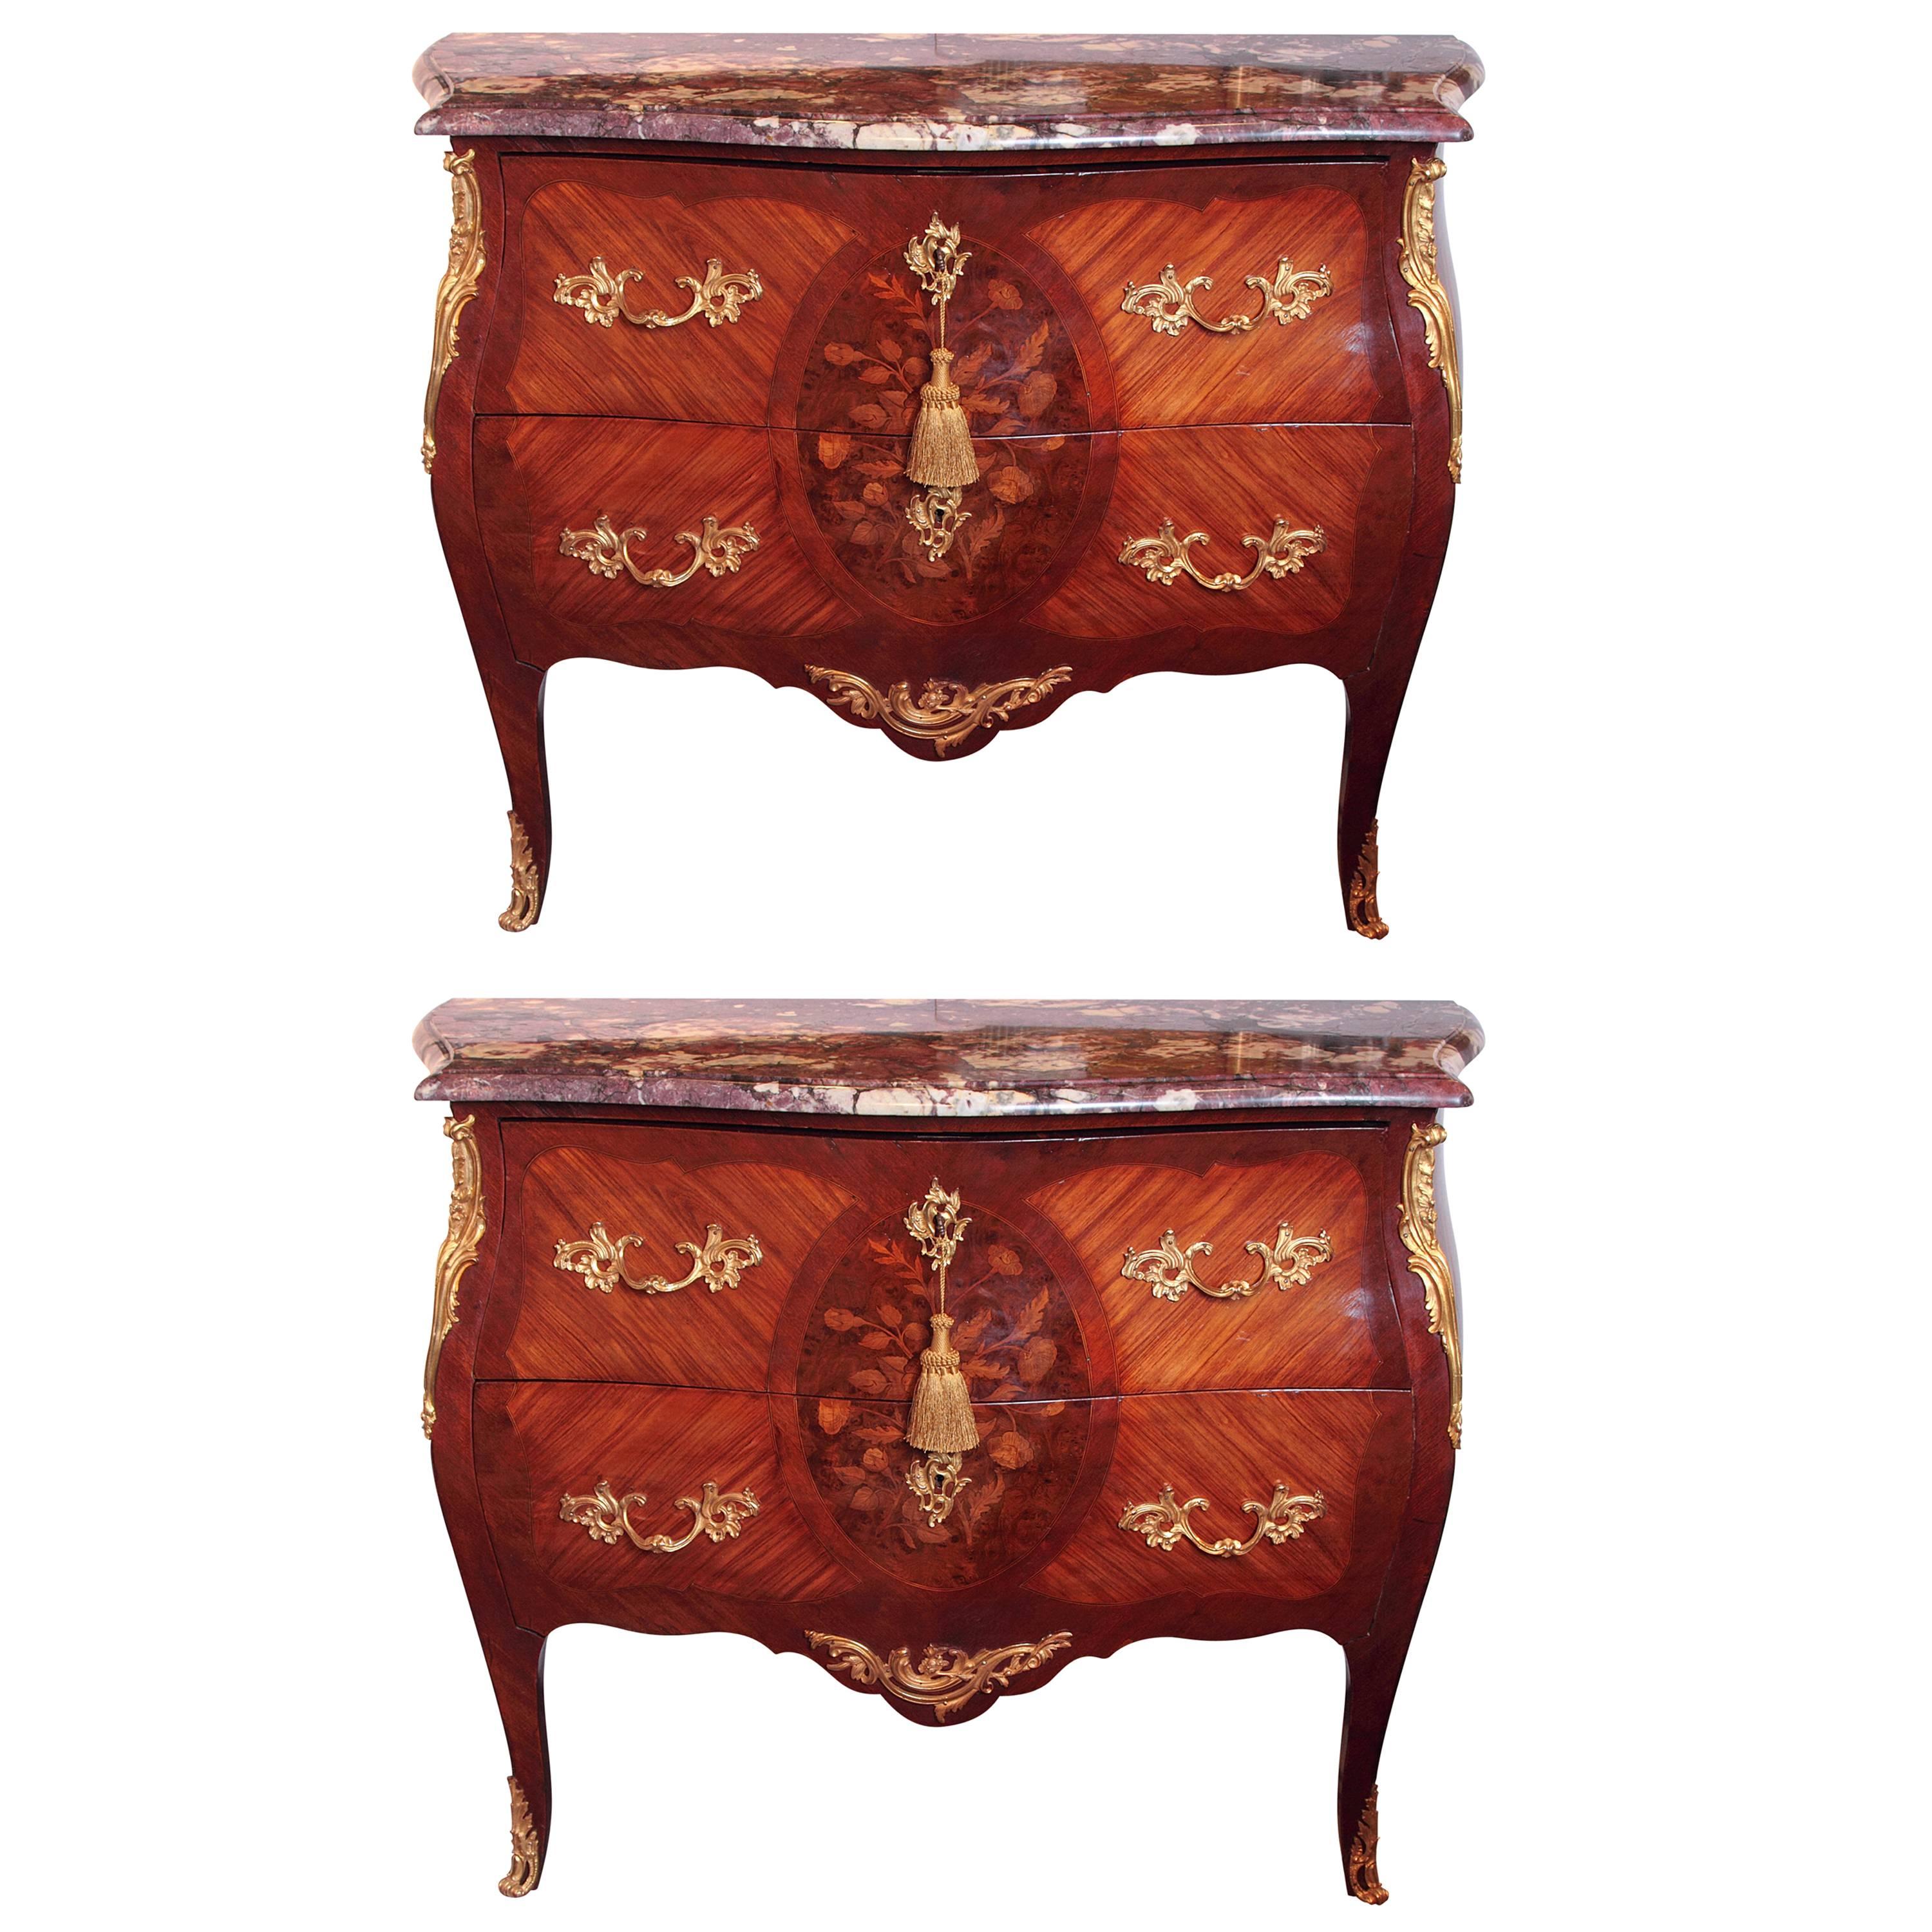 19th Century French Louis XV Marquetry Marble-Top Commodes